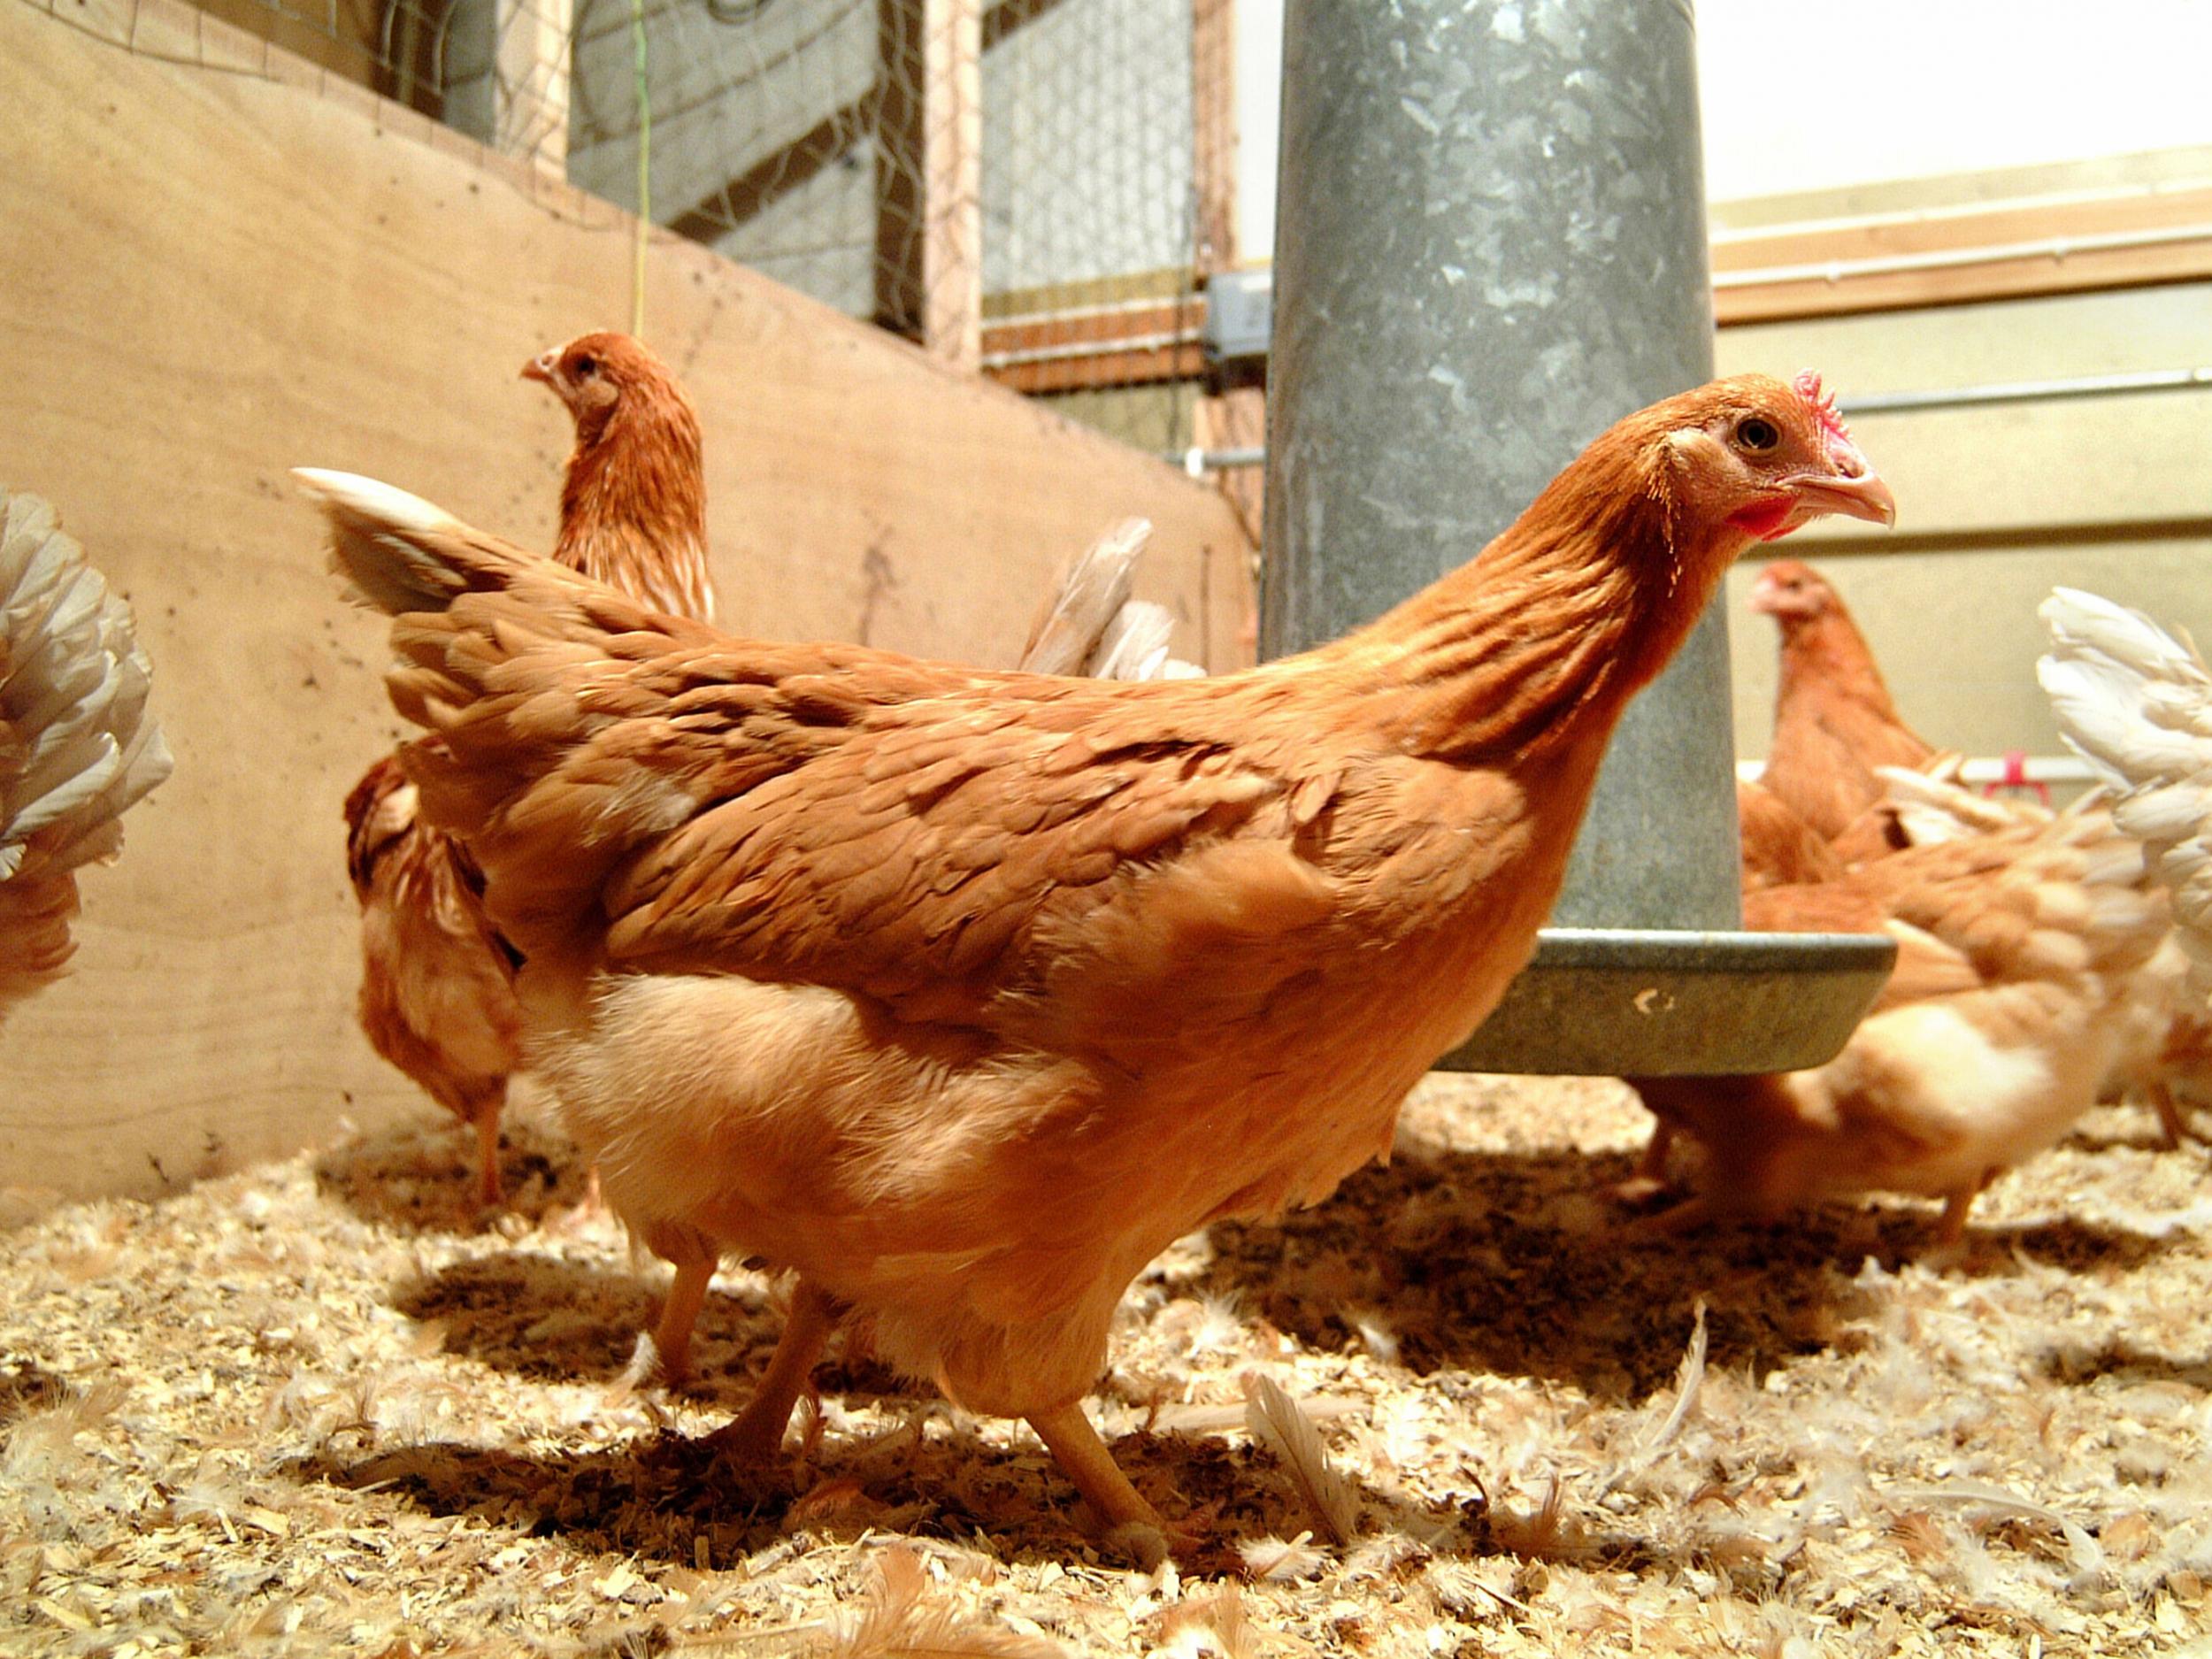 Scientists have produced GM chickens that make human proteins in their eggs